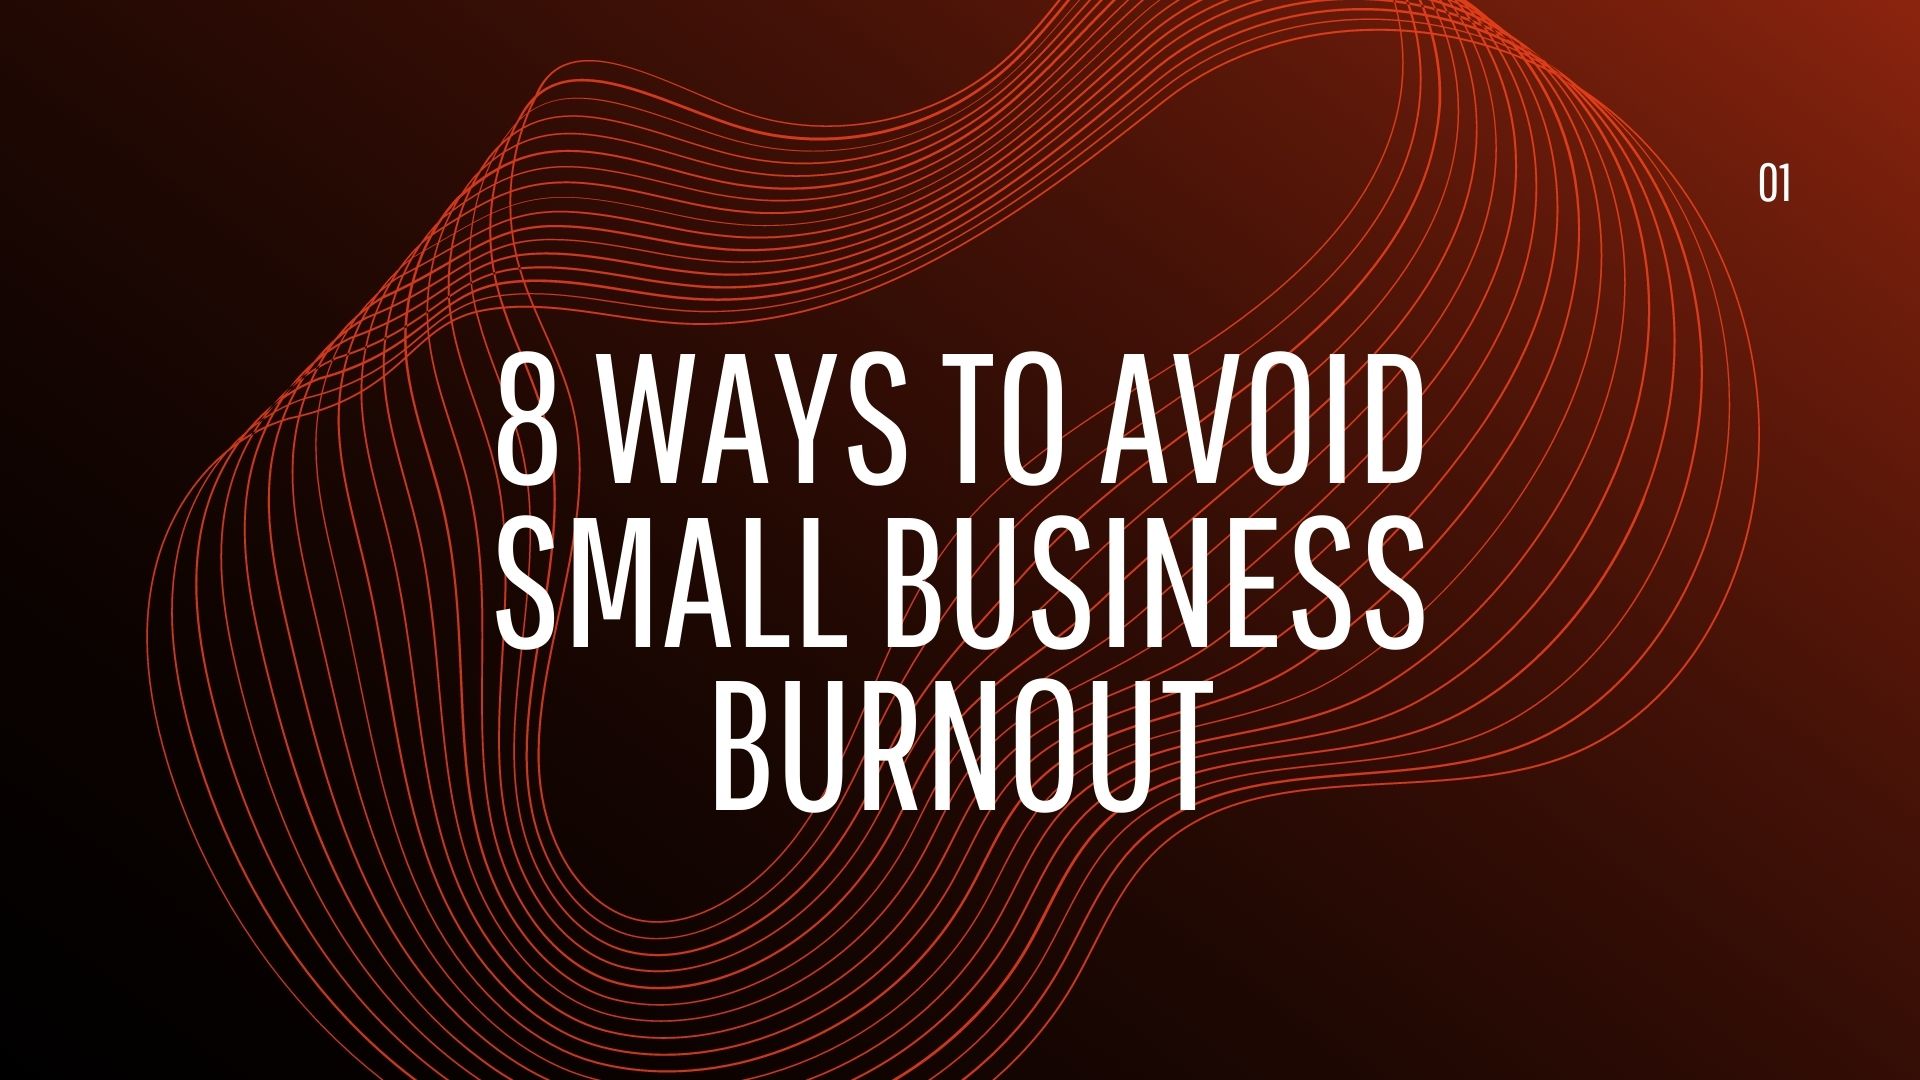 8 Ways To Avoid Small Business Burnout